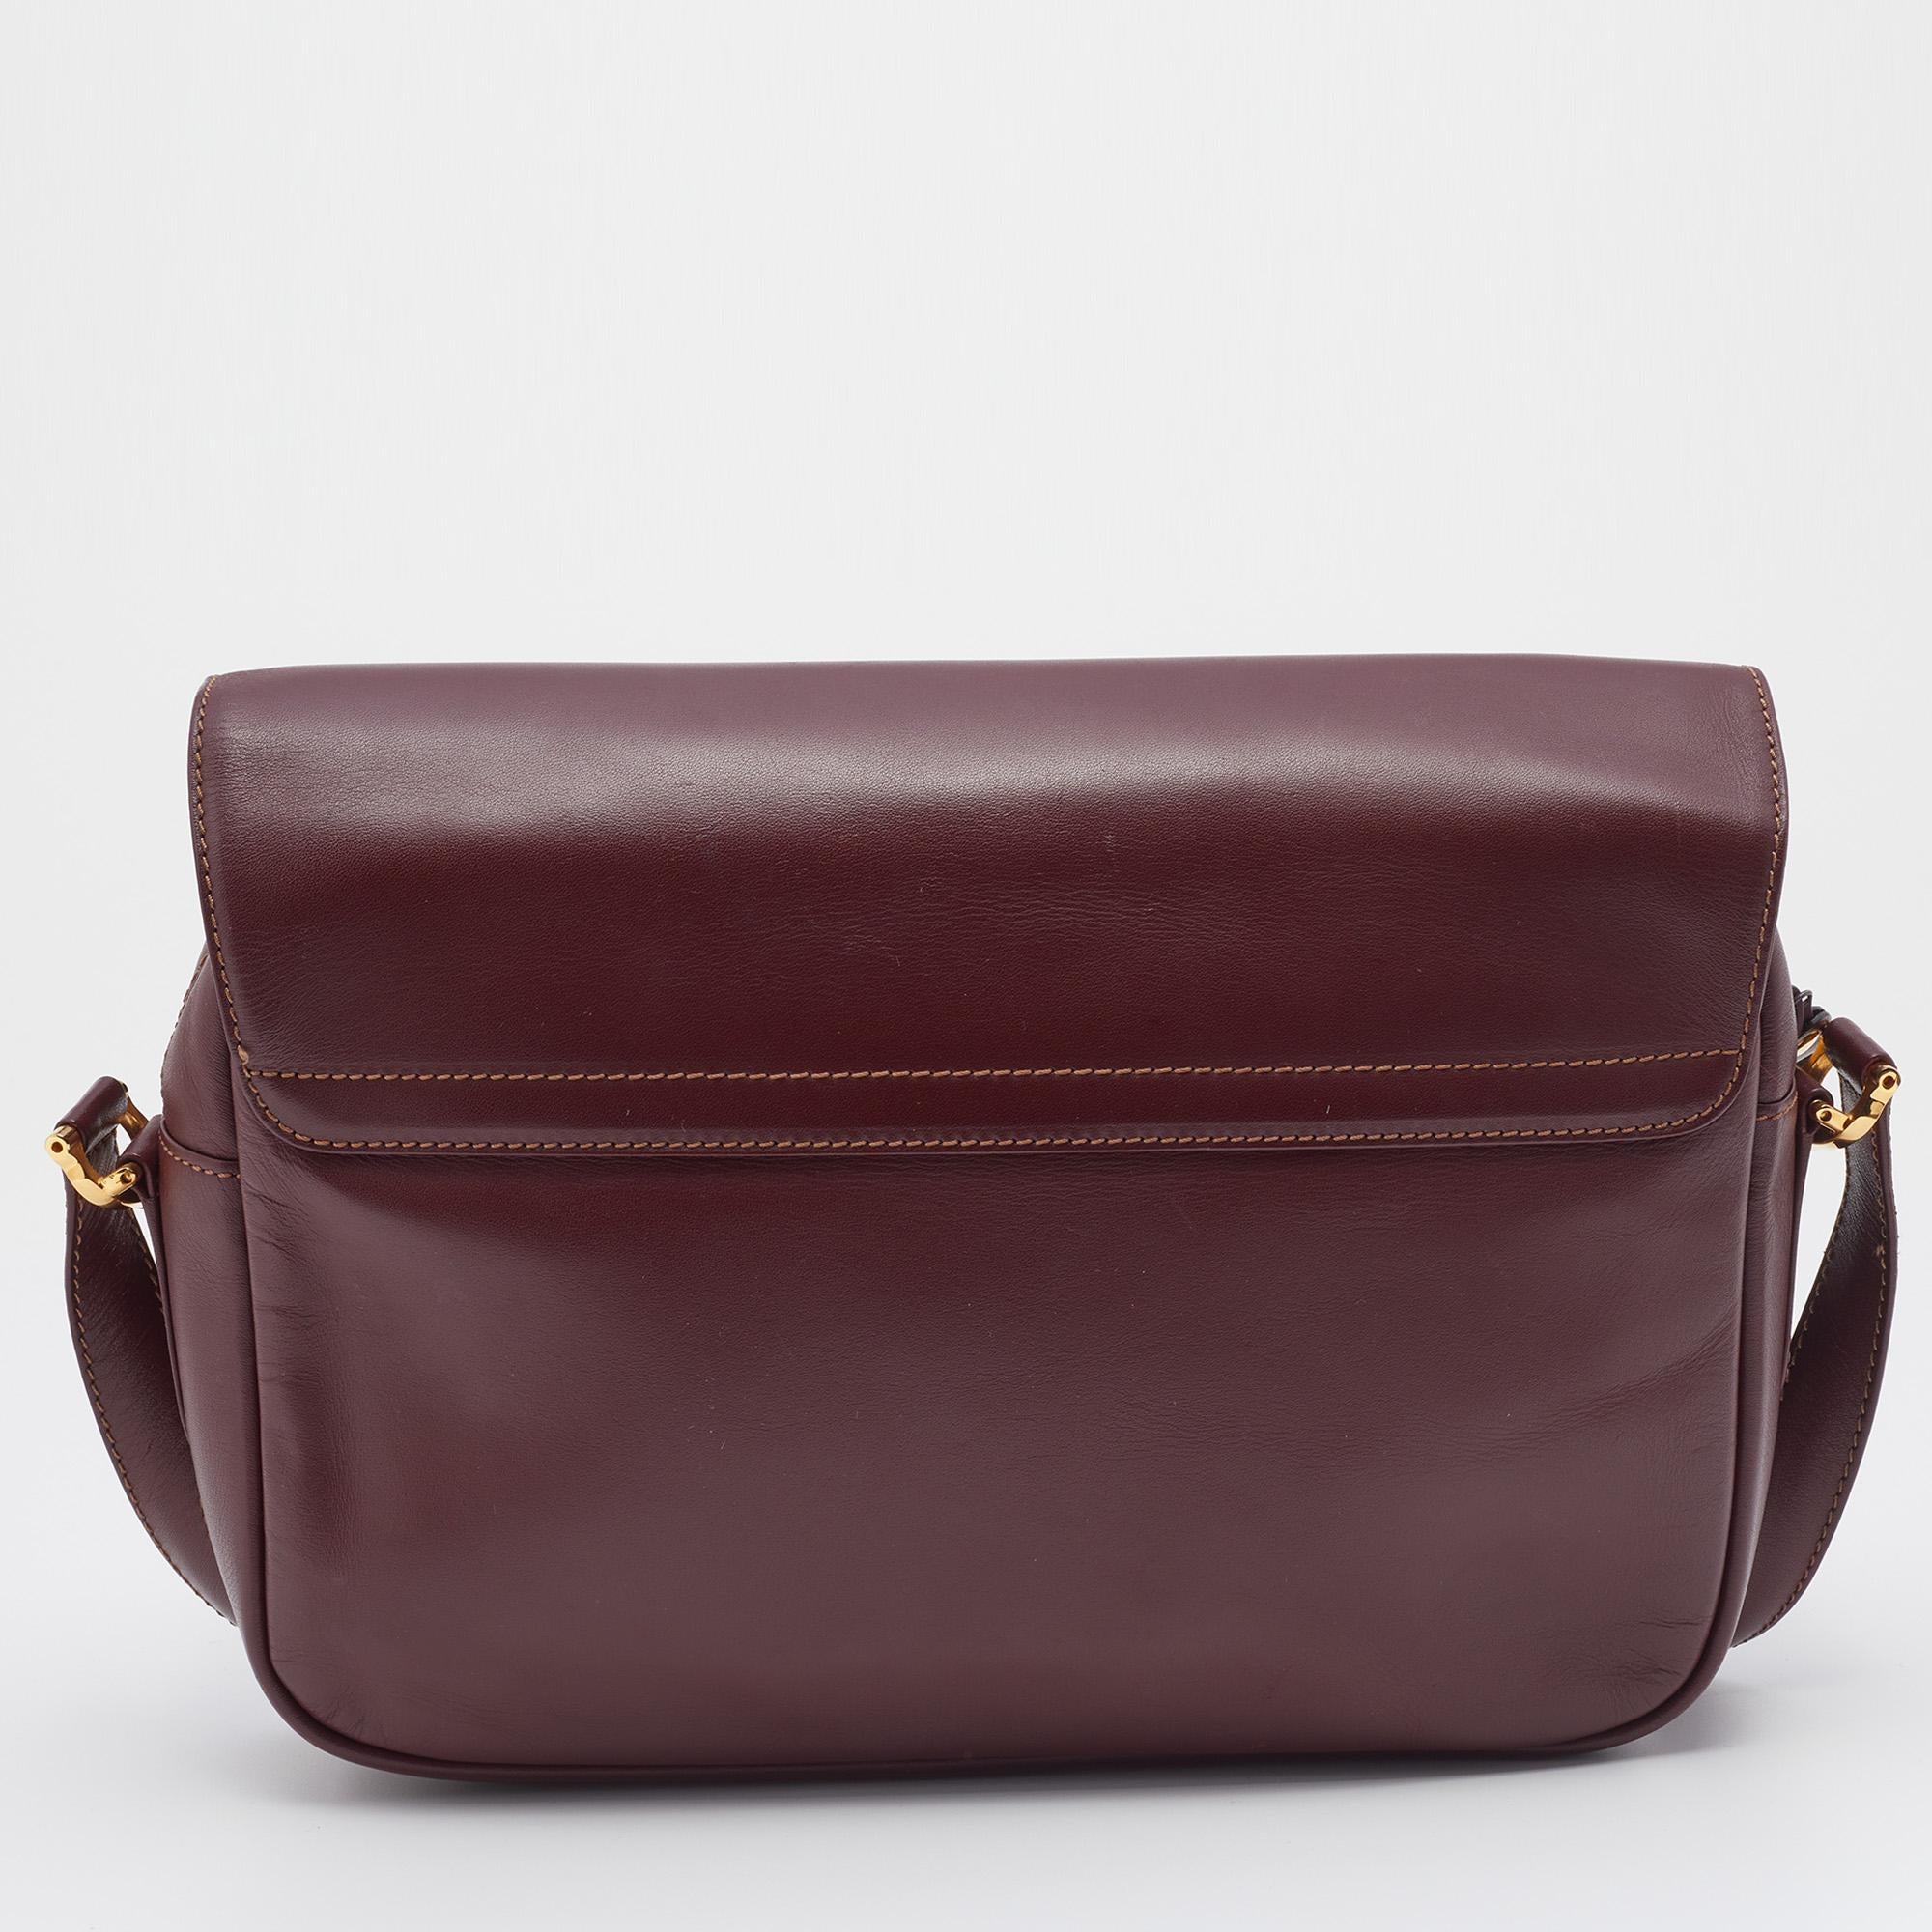 This Must de Cartier shoulder bag from Cartier is a luxurious piece worth adding to your closet. It is crafted from burgundy leather into a simple design with gold-tone hardware. It has a roomy fabric interior to securely house your